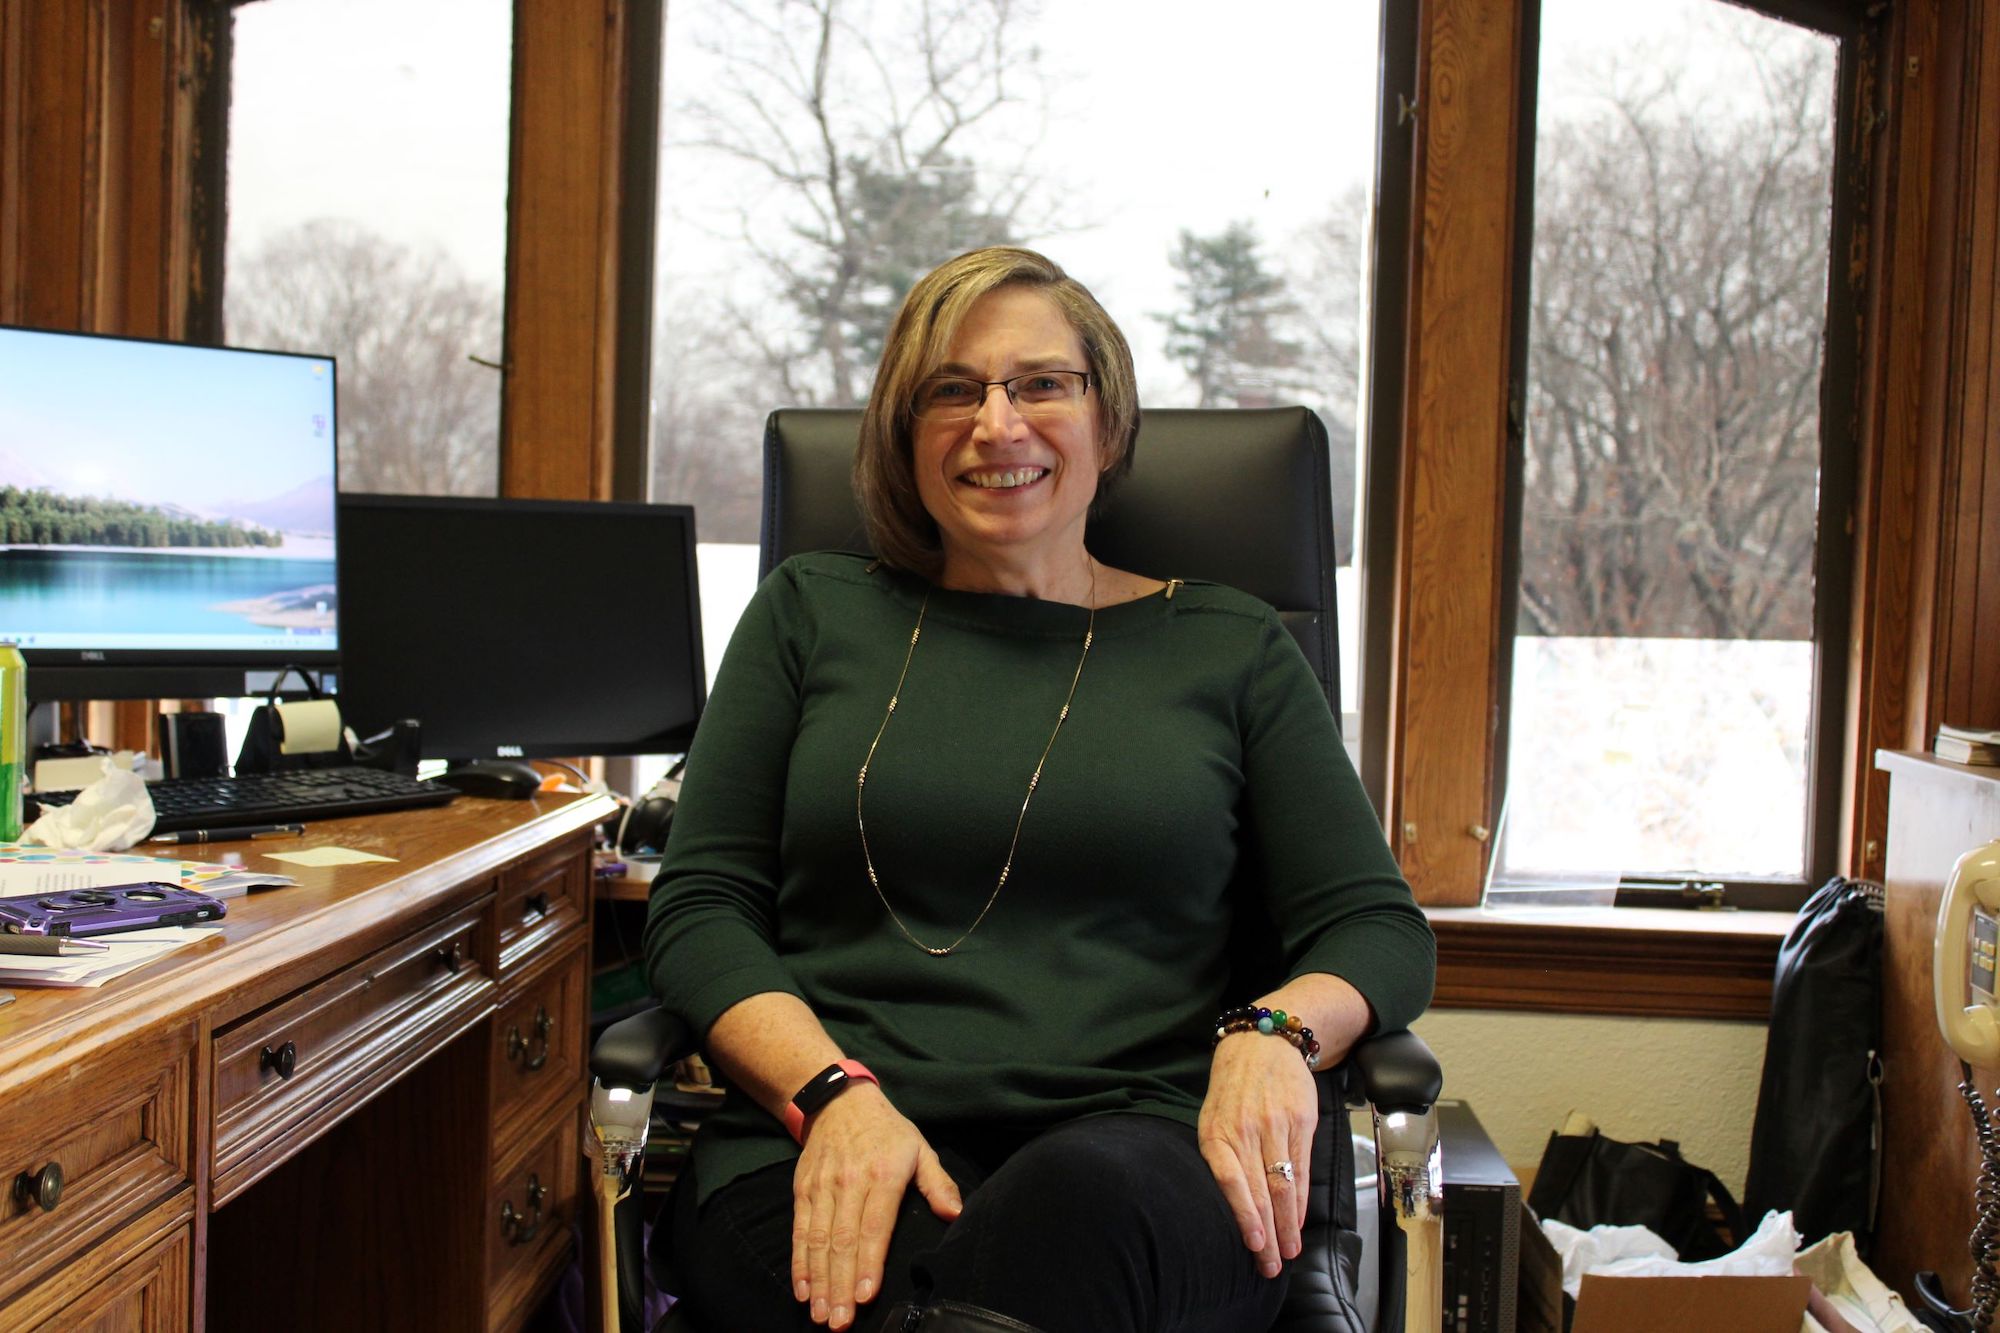 Maureen Amyot – library director and kidney donor